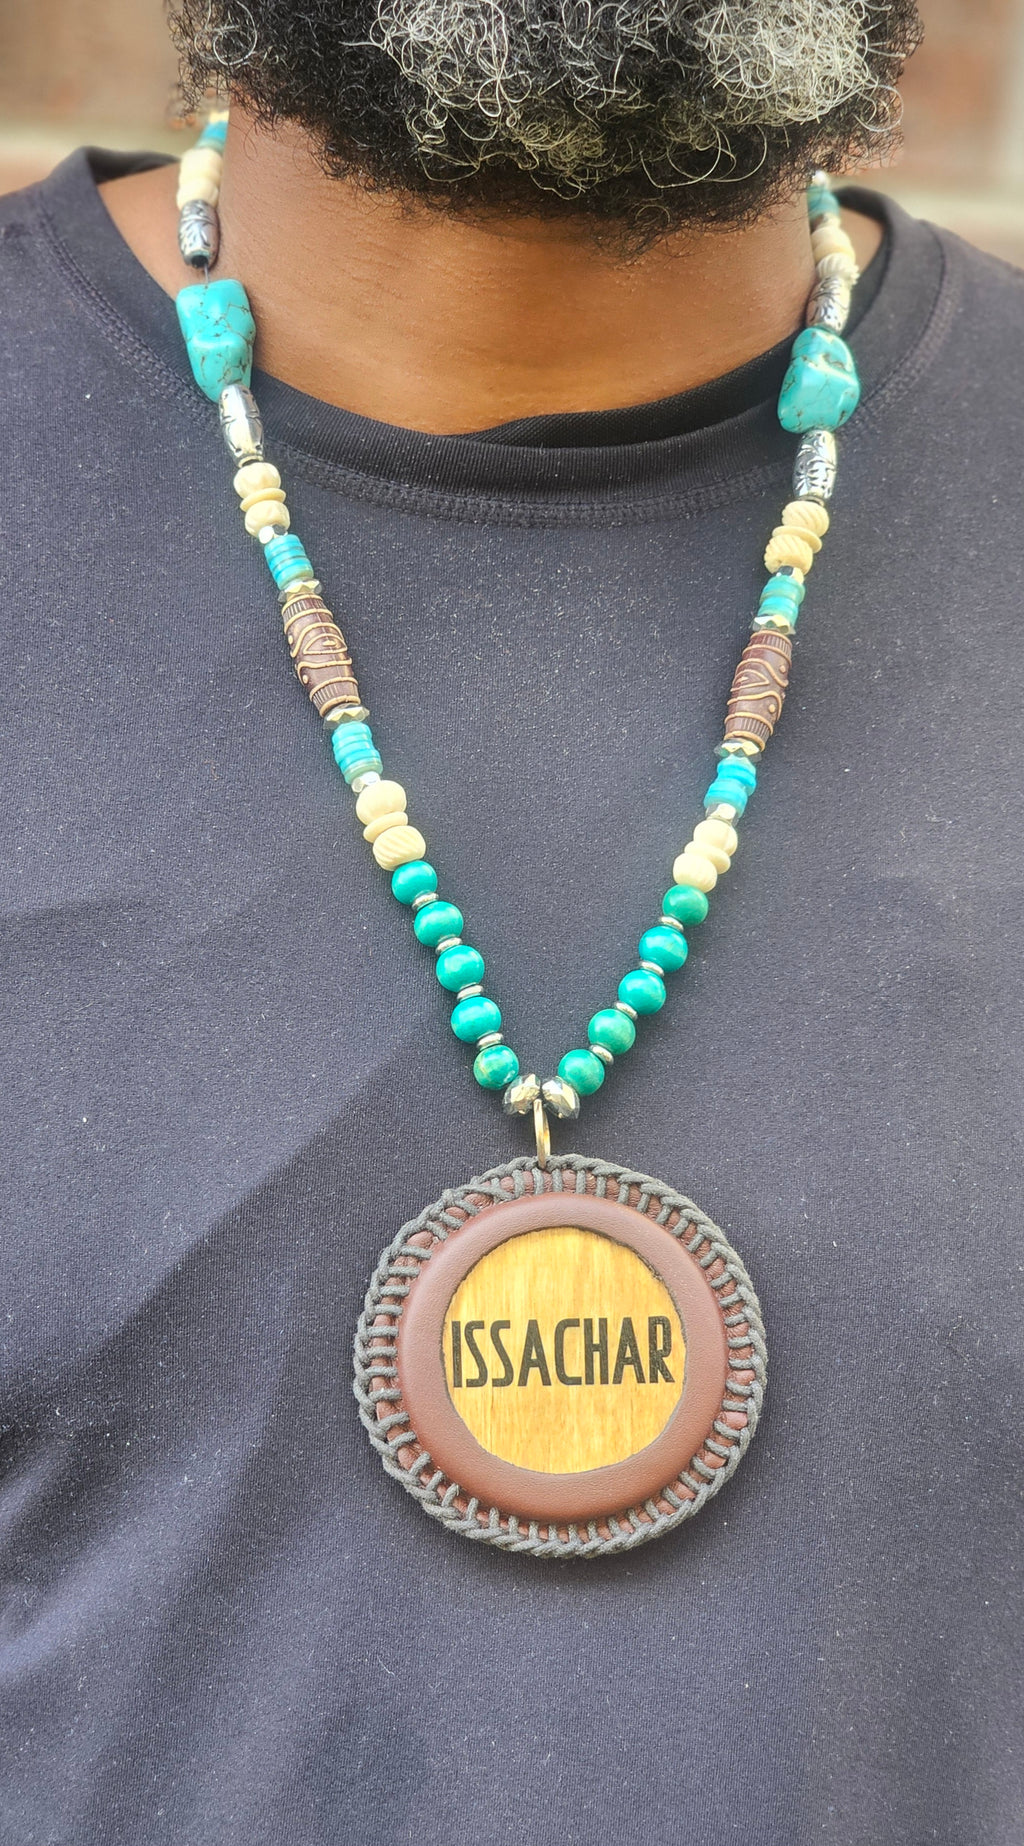 Leather Wrapped Issachar Medallion Necklace